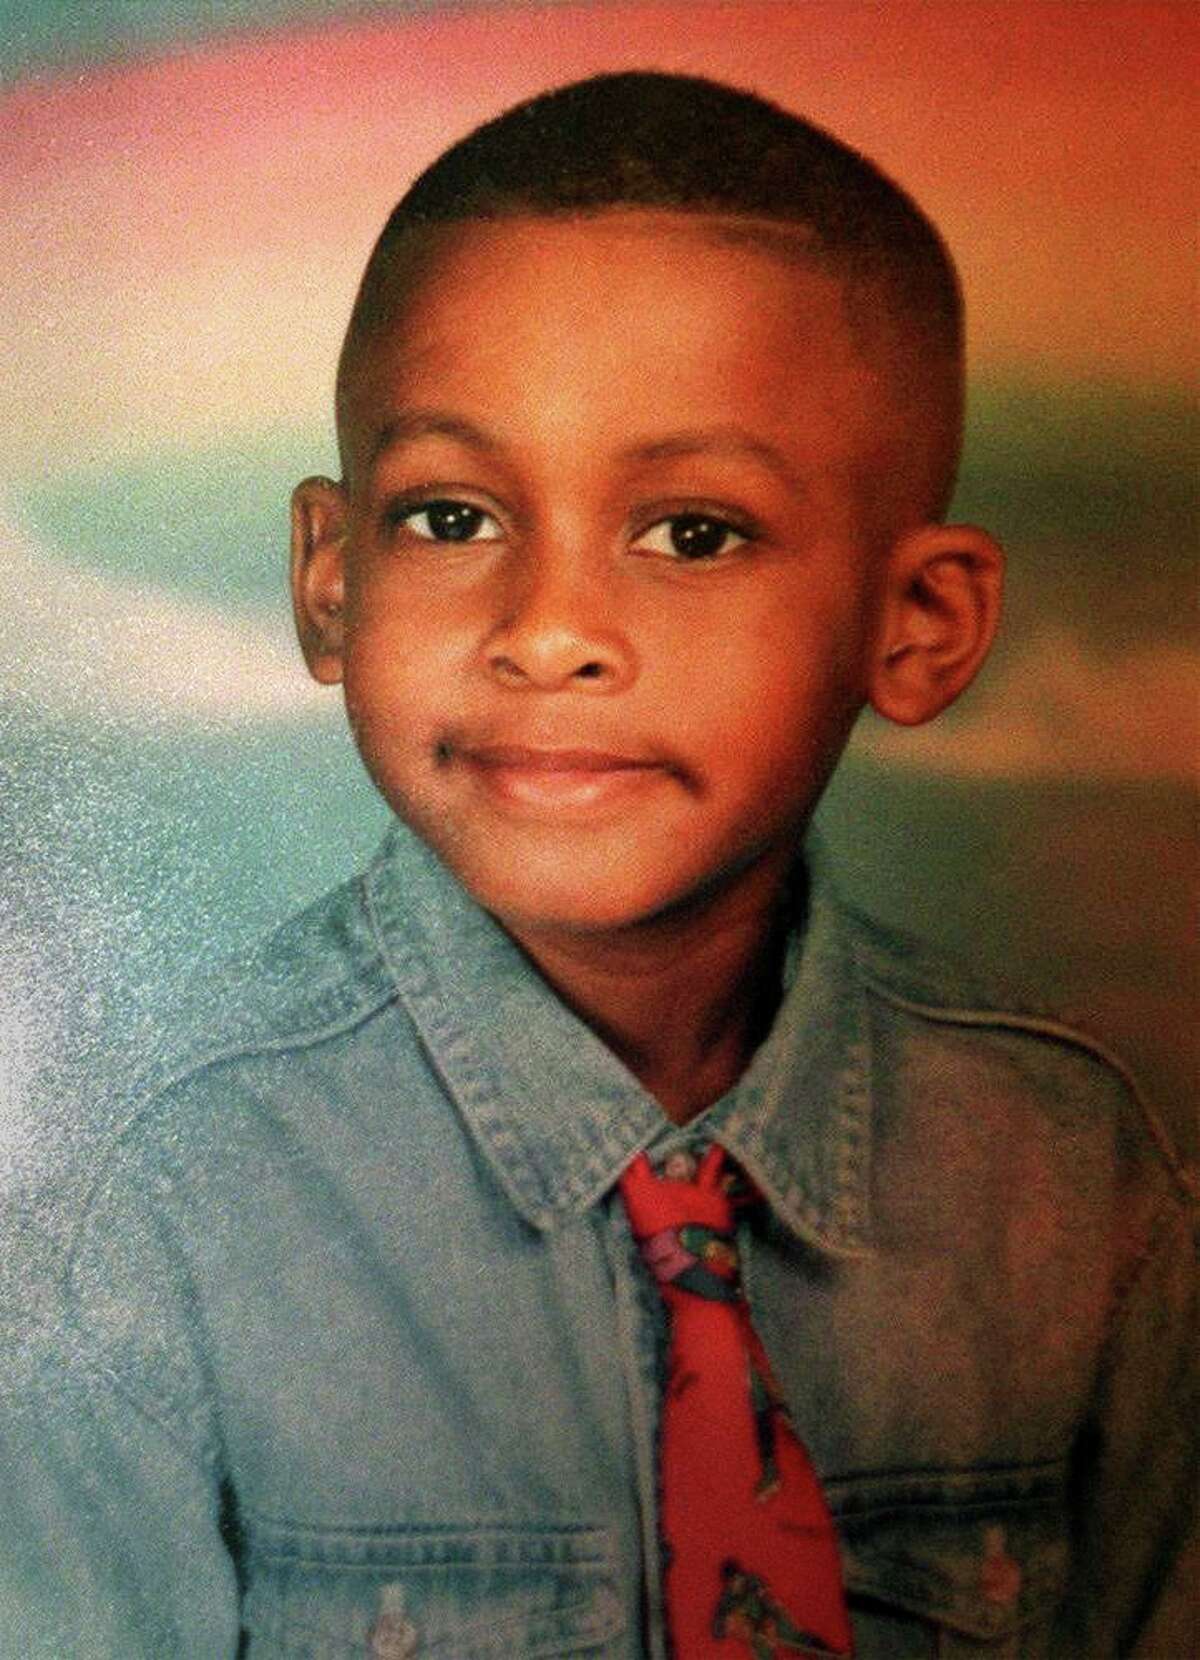 Leroy "B.J." Brown, Jr., who was eight years old when he was shot and killed along with his mother, Karen Clarke, in their Bridgeport, Conn. duplex on January 8, 1999.